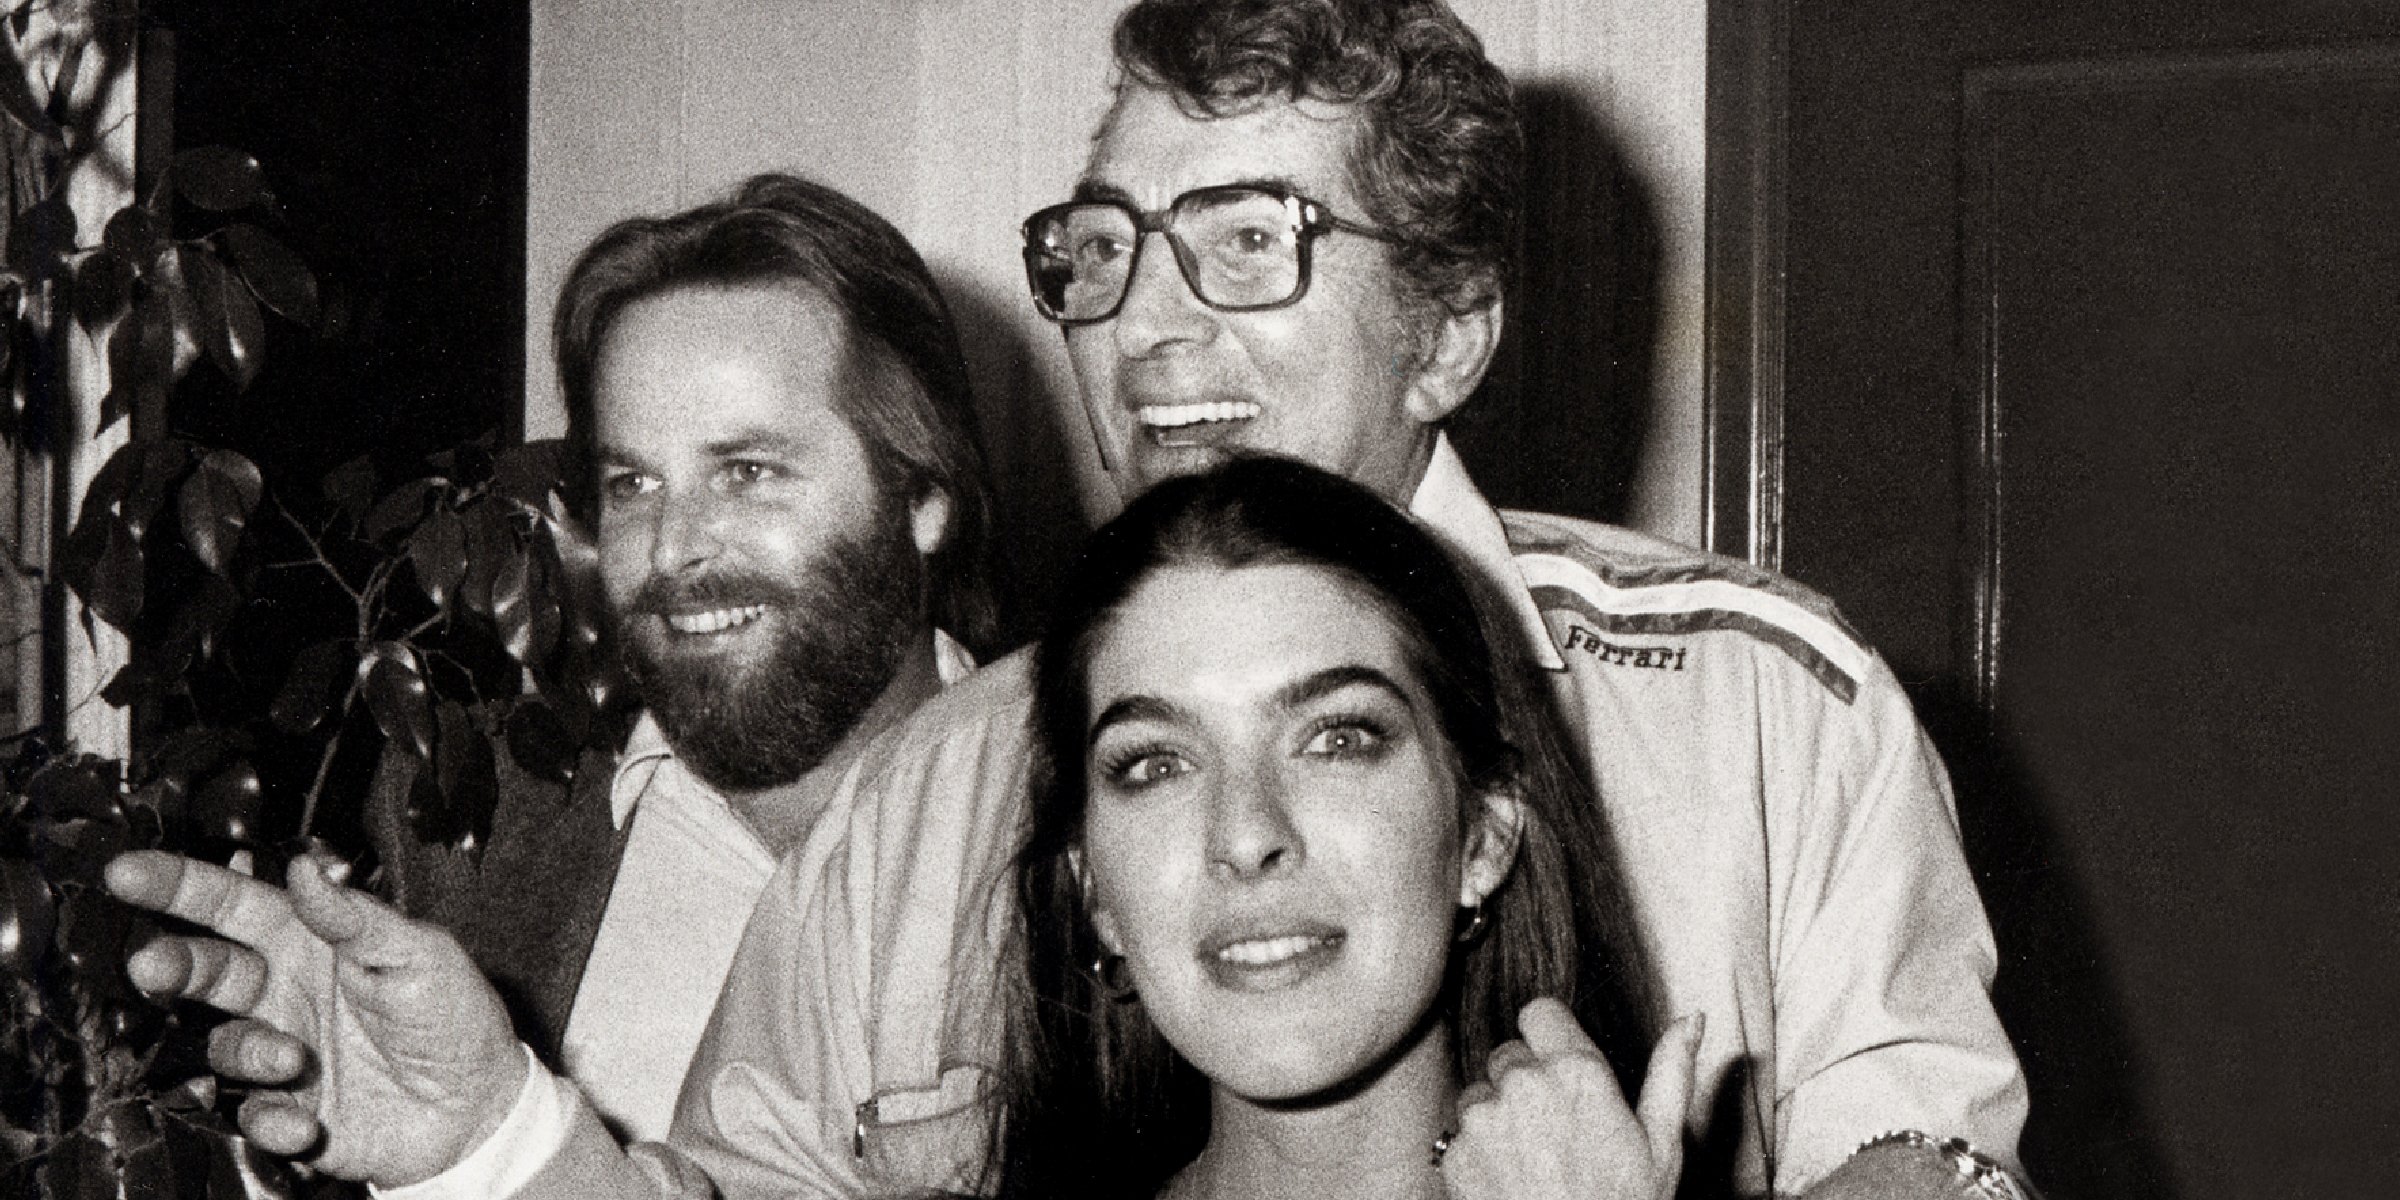 Carl Wilson, Dean Martin, and Gina Martin Wilson | Source: Getty Images